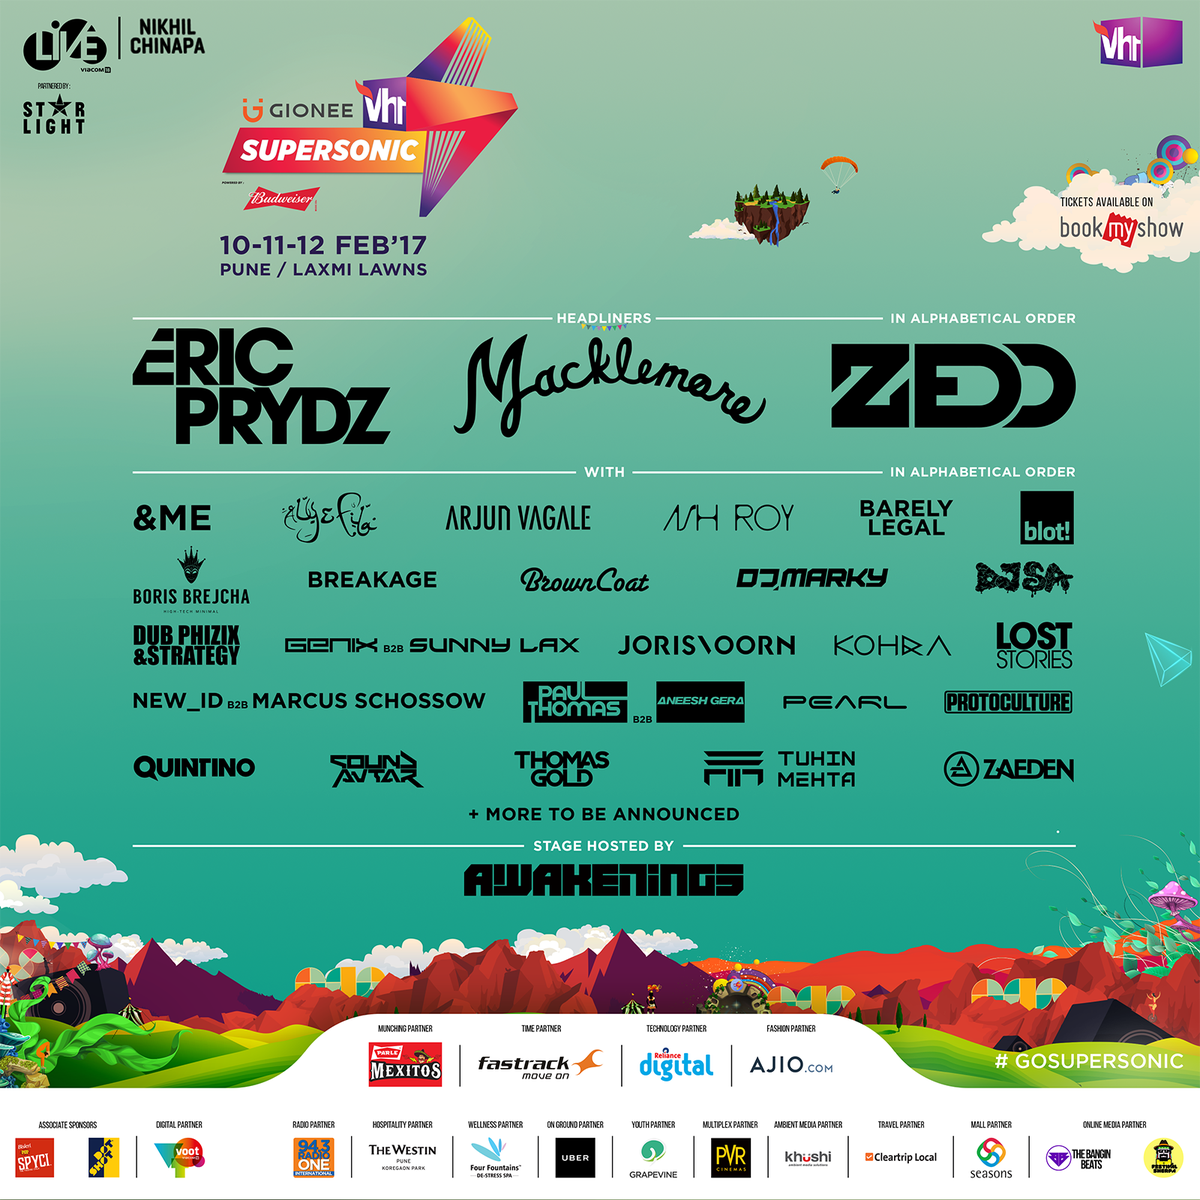 Vh1 Supersonic 2017 in Pune (Line-Up)